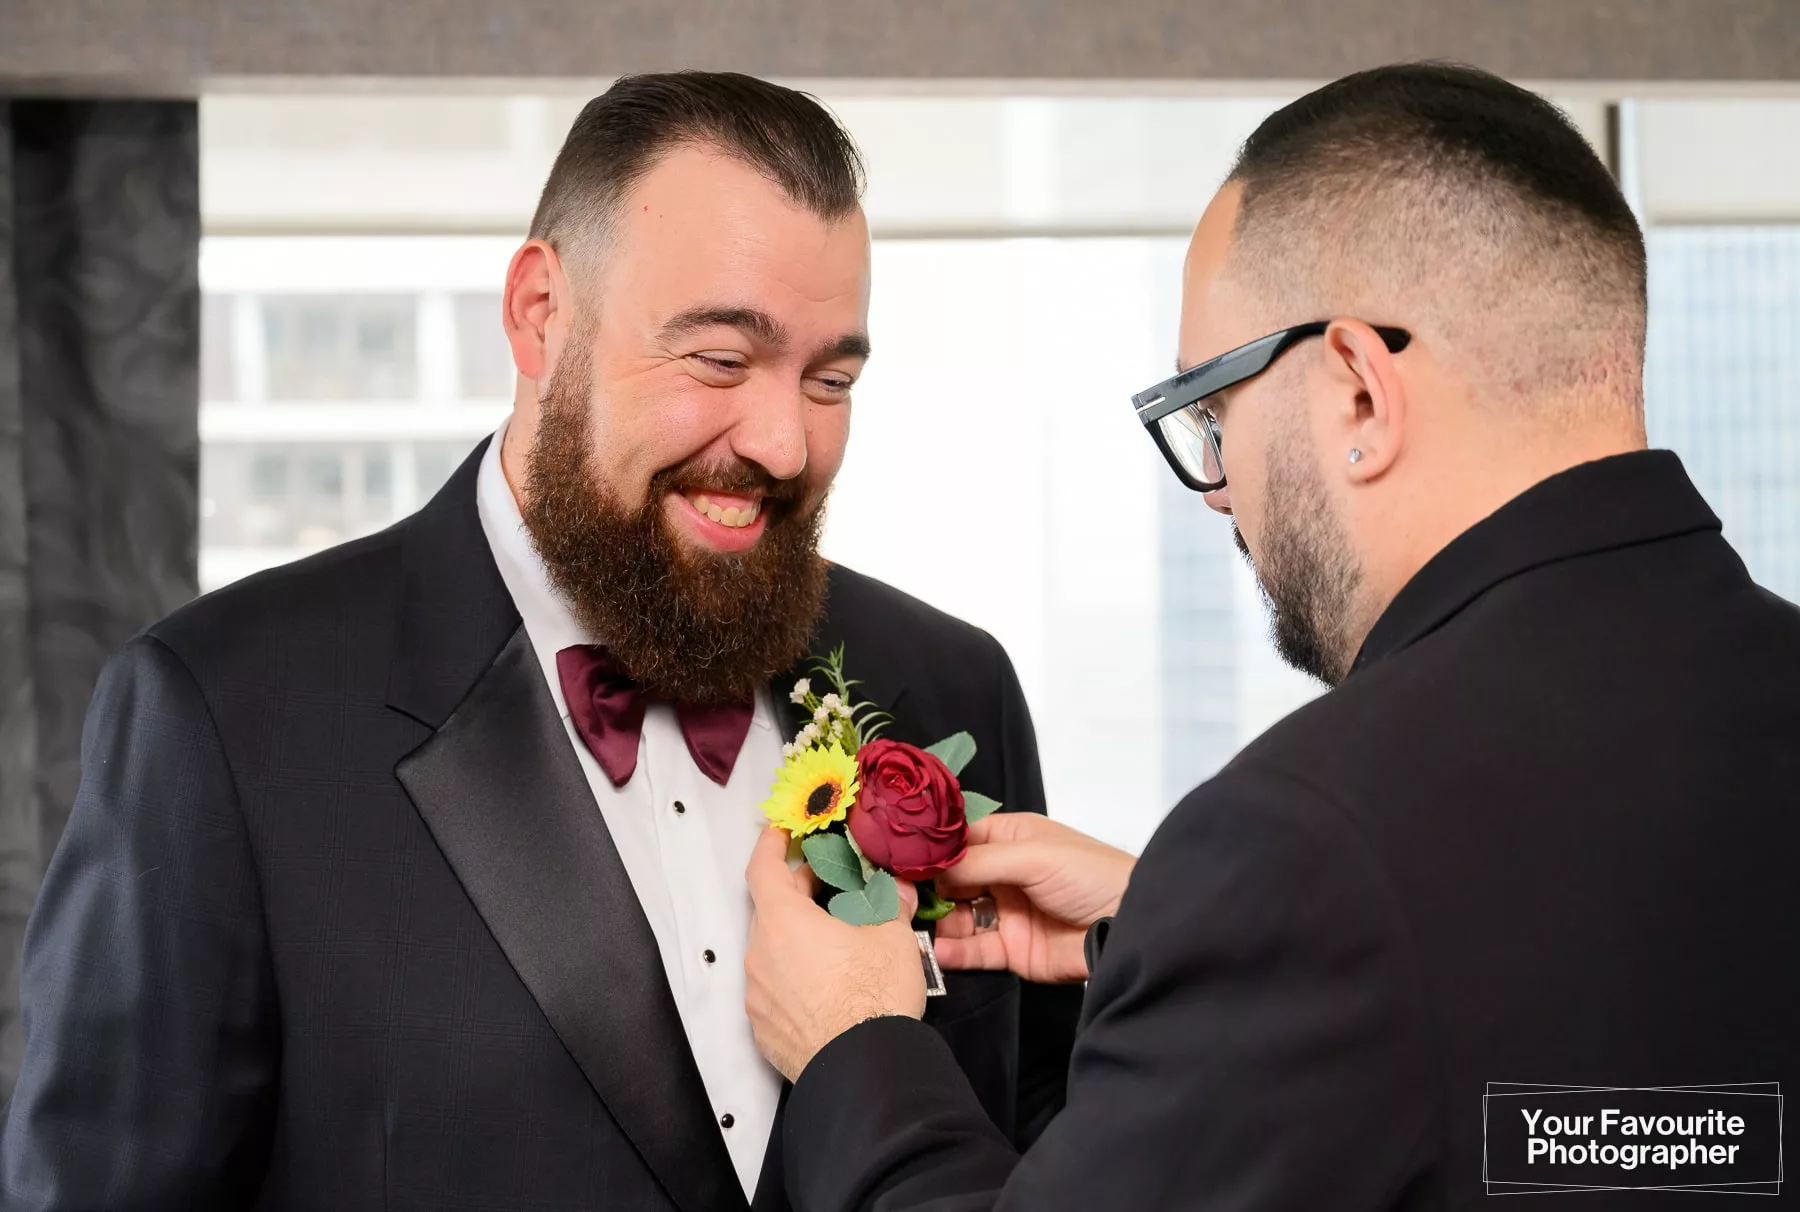 Groom getting his boutonniere placed on his suit jacket